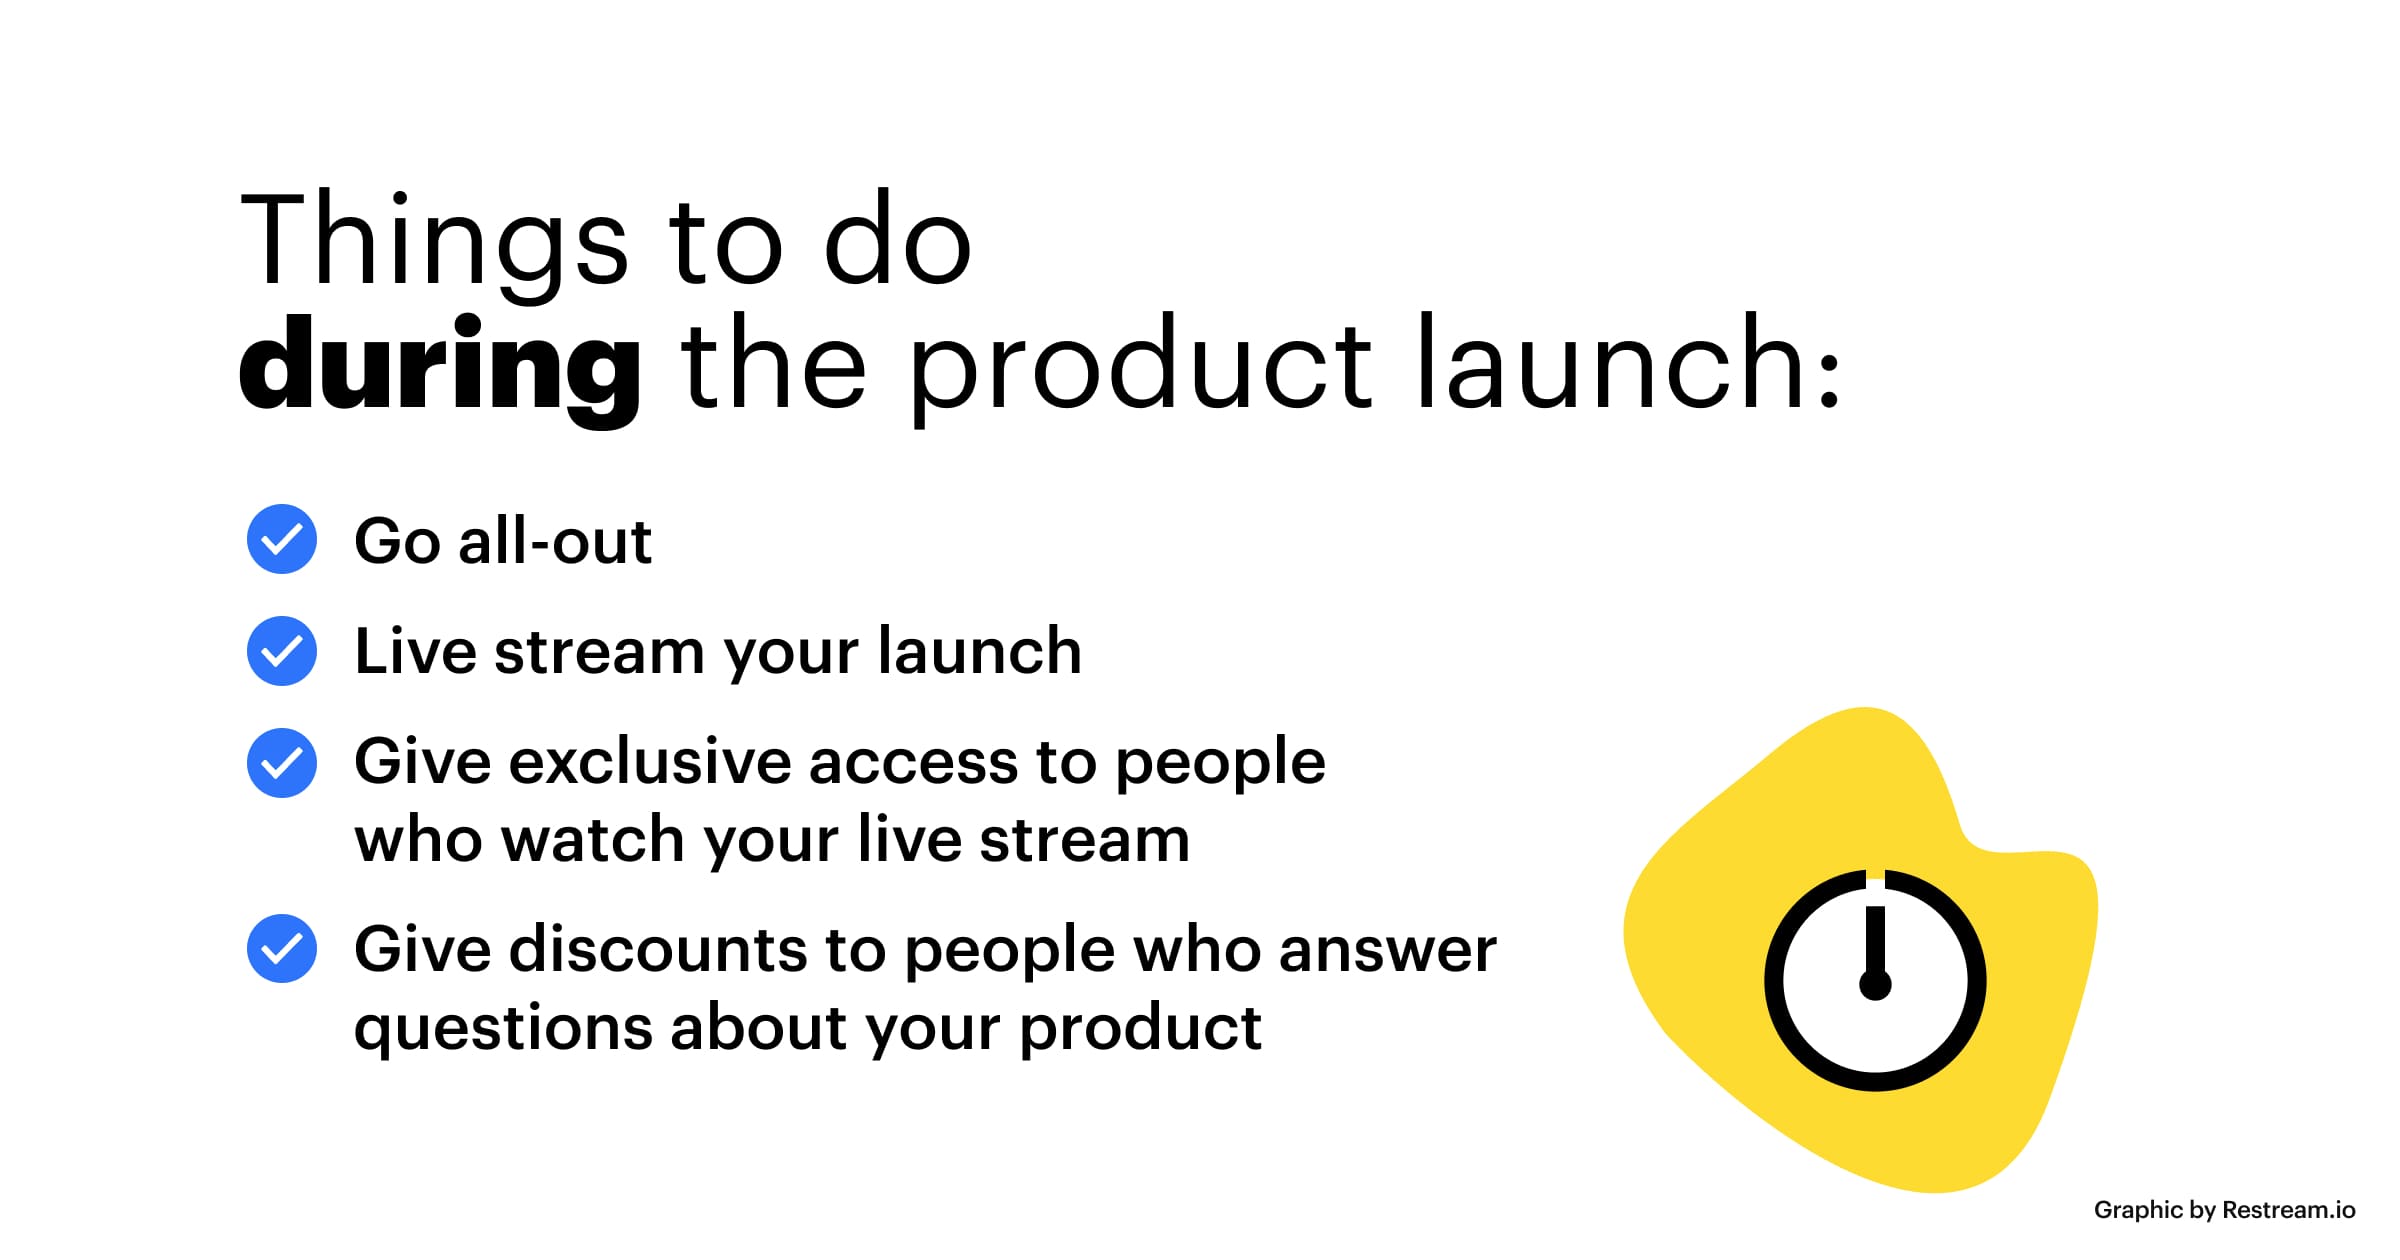 Things to do during the product launch